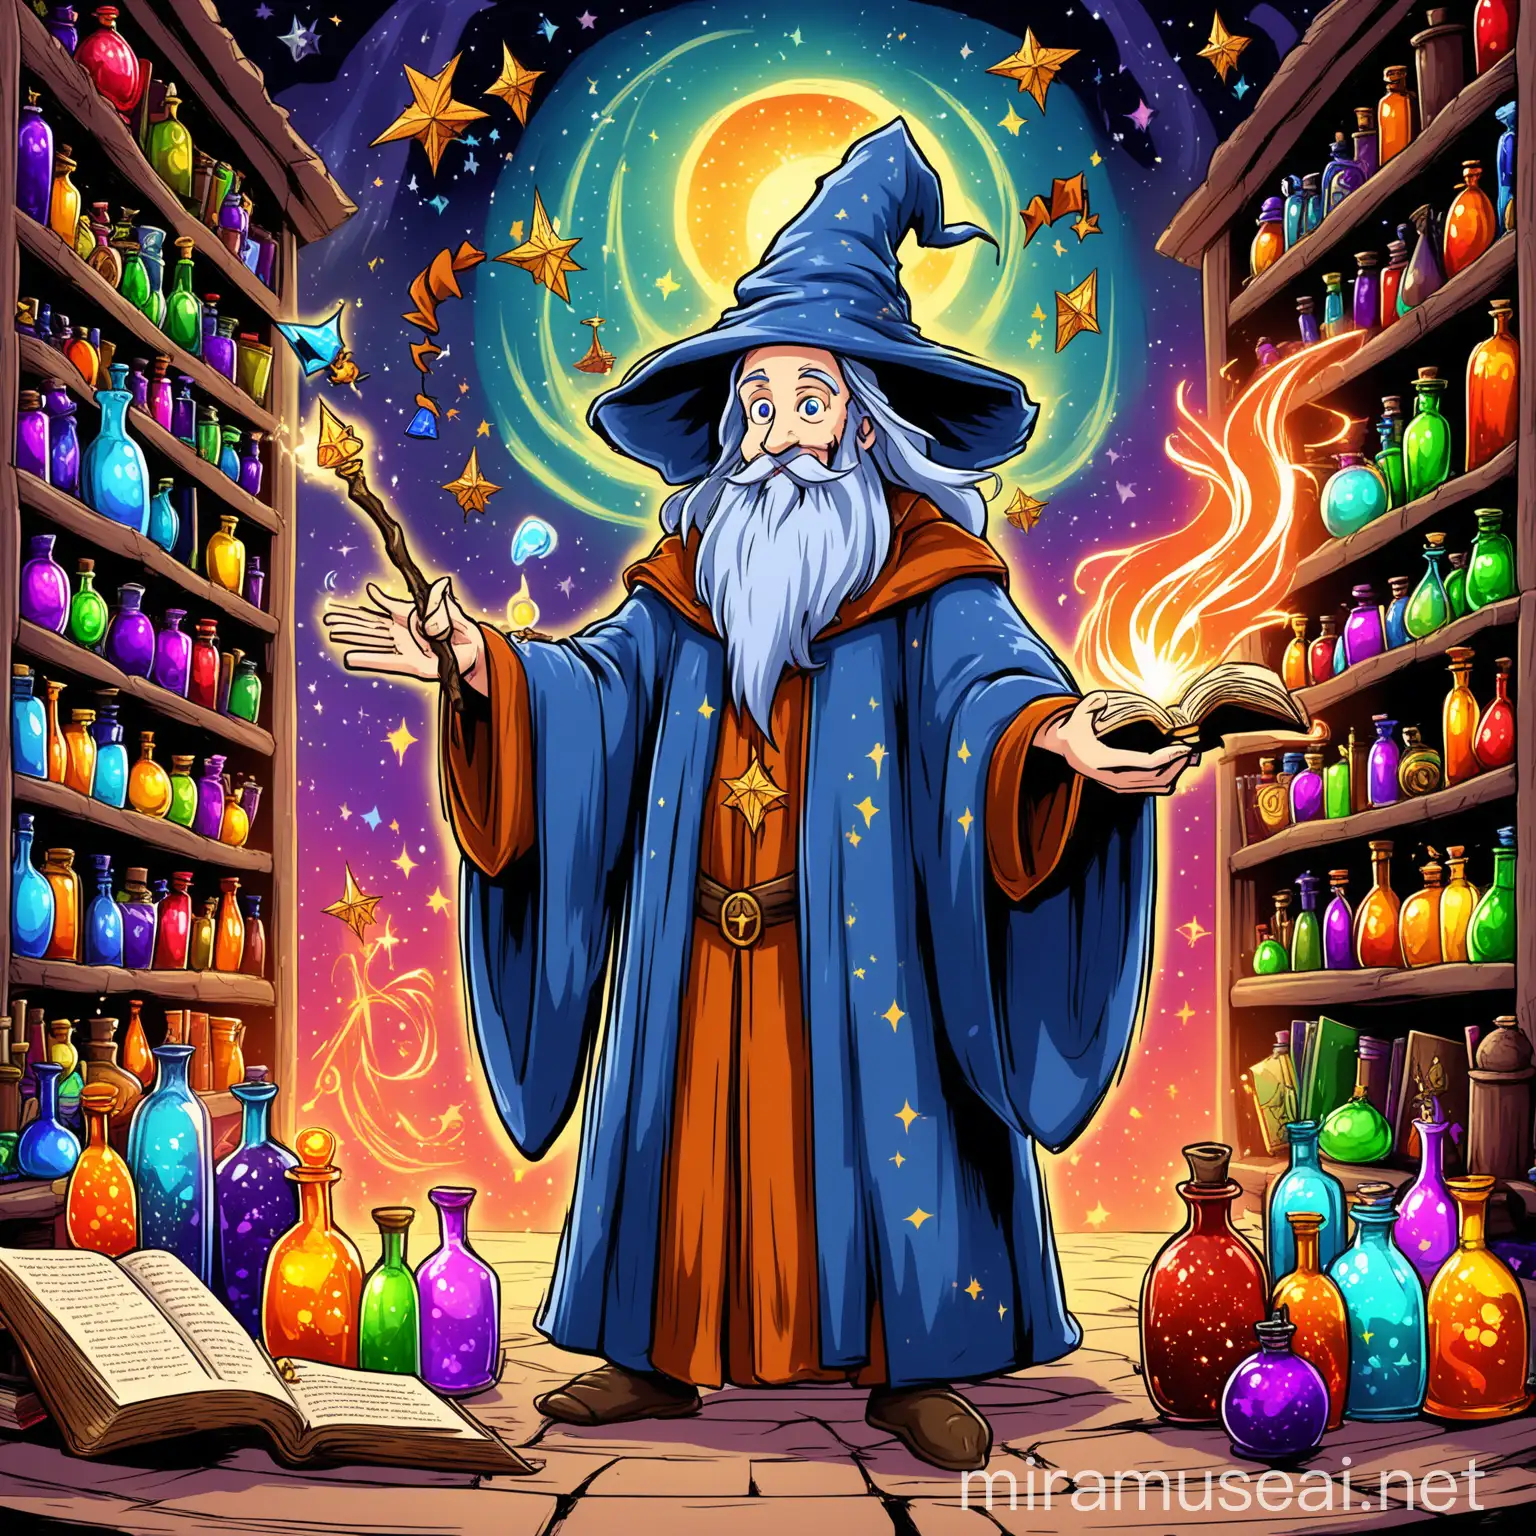 Cartoon style image of a wizard casting a spell. The wizard wears a classic pointed hat and flowing robe, with a long beard and a mischievous smile. He stands nearby and waves his wand. The scene is colorful and vibrant, with bottles of potions, mystical ingredients, and spell books scattered around. The background is simple to focus on the wizard and his spell